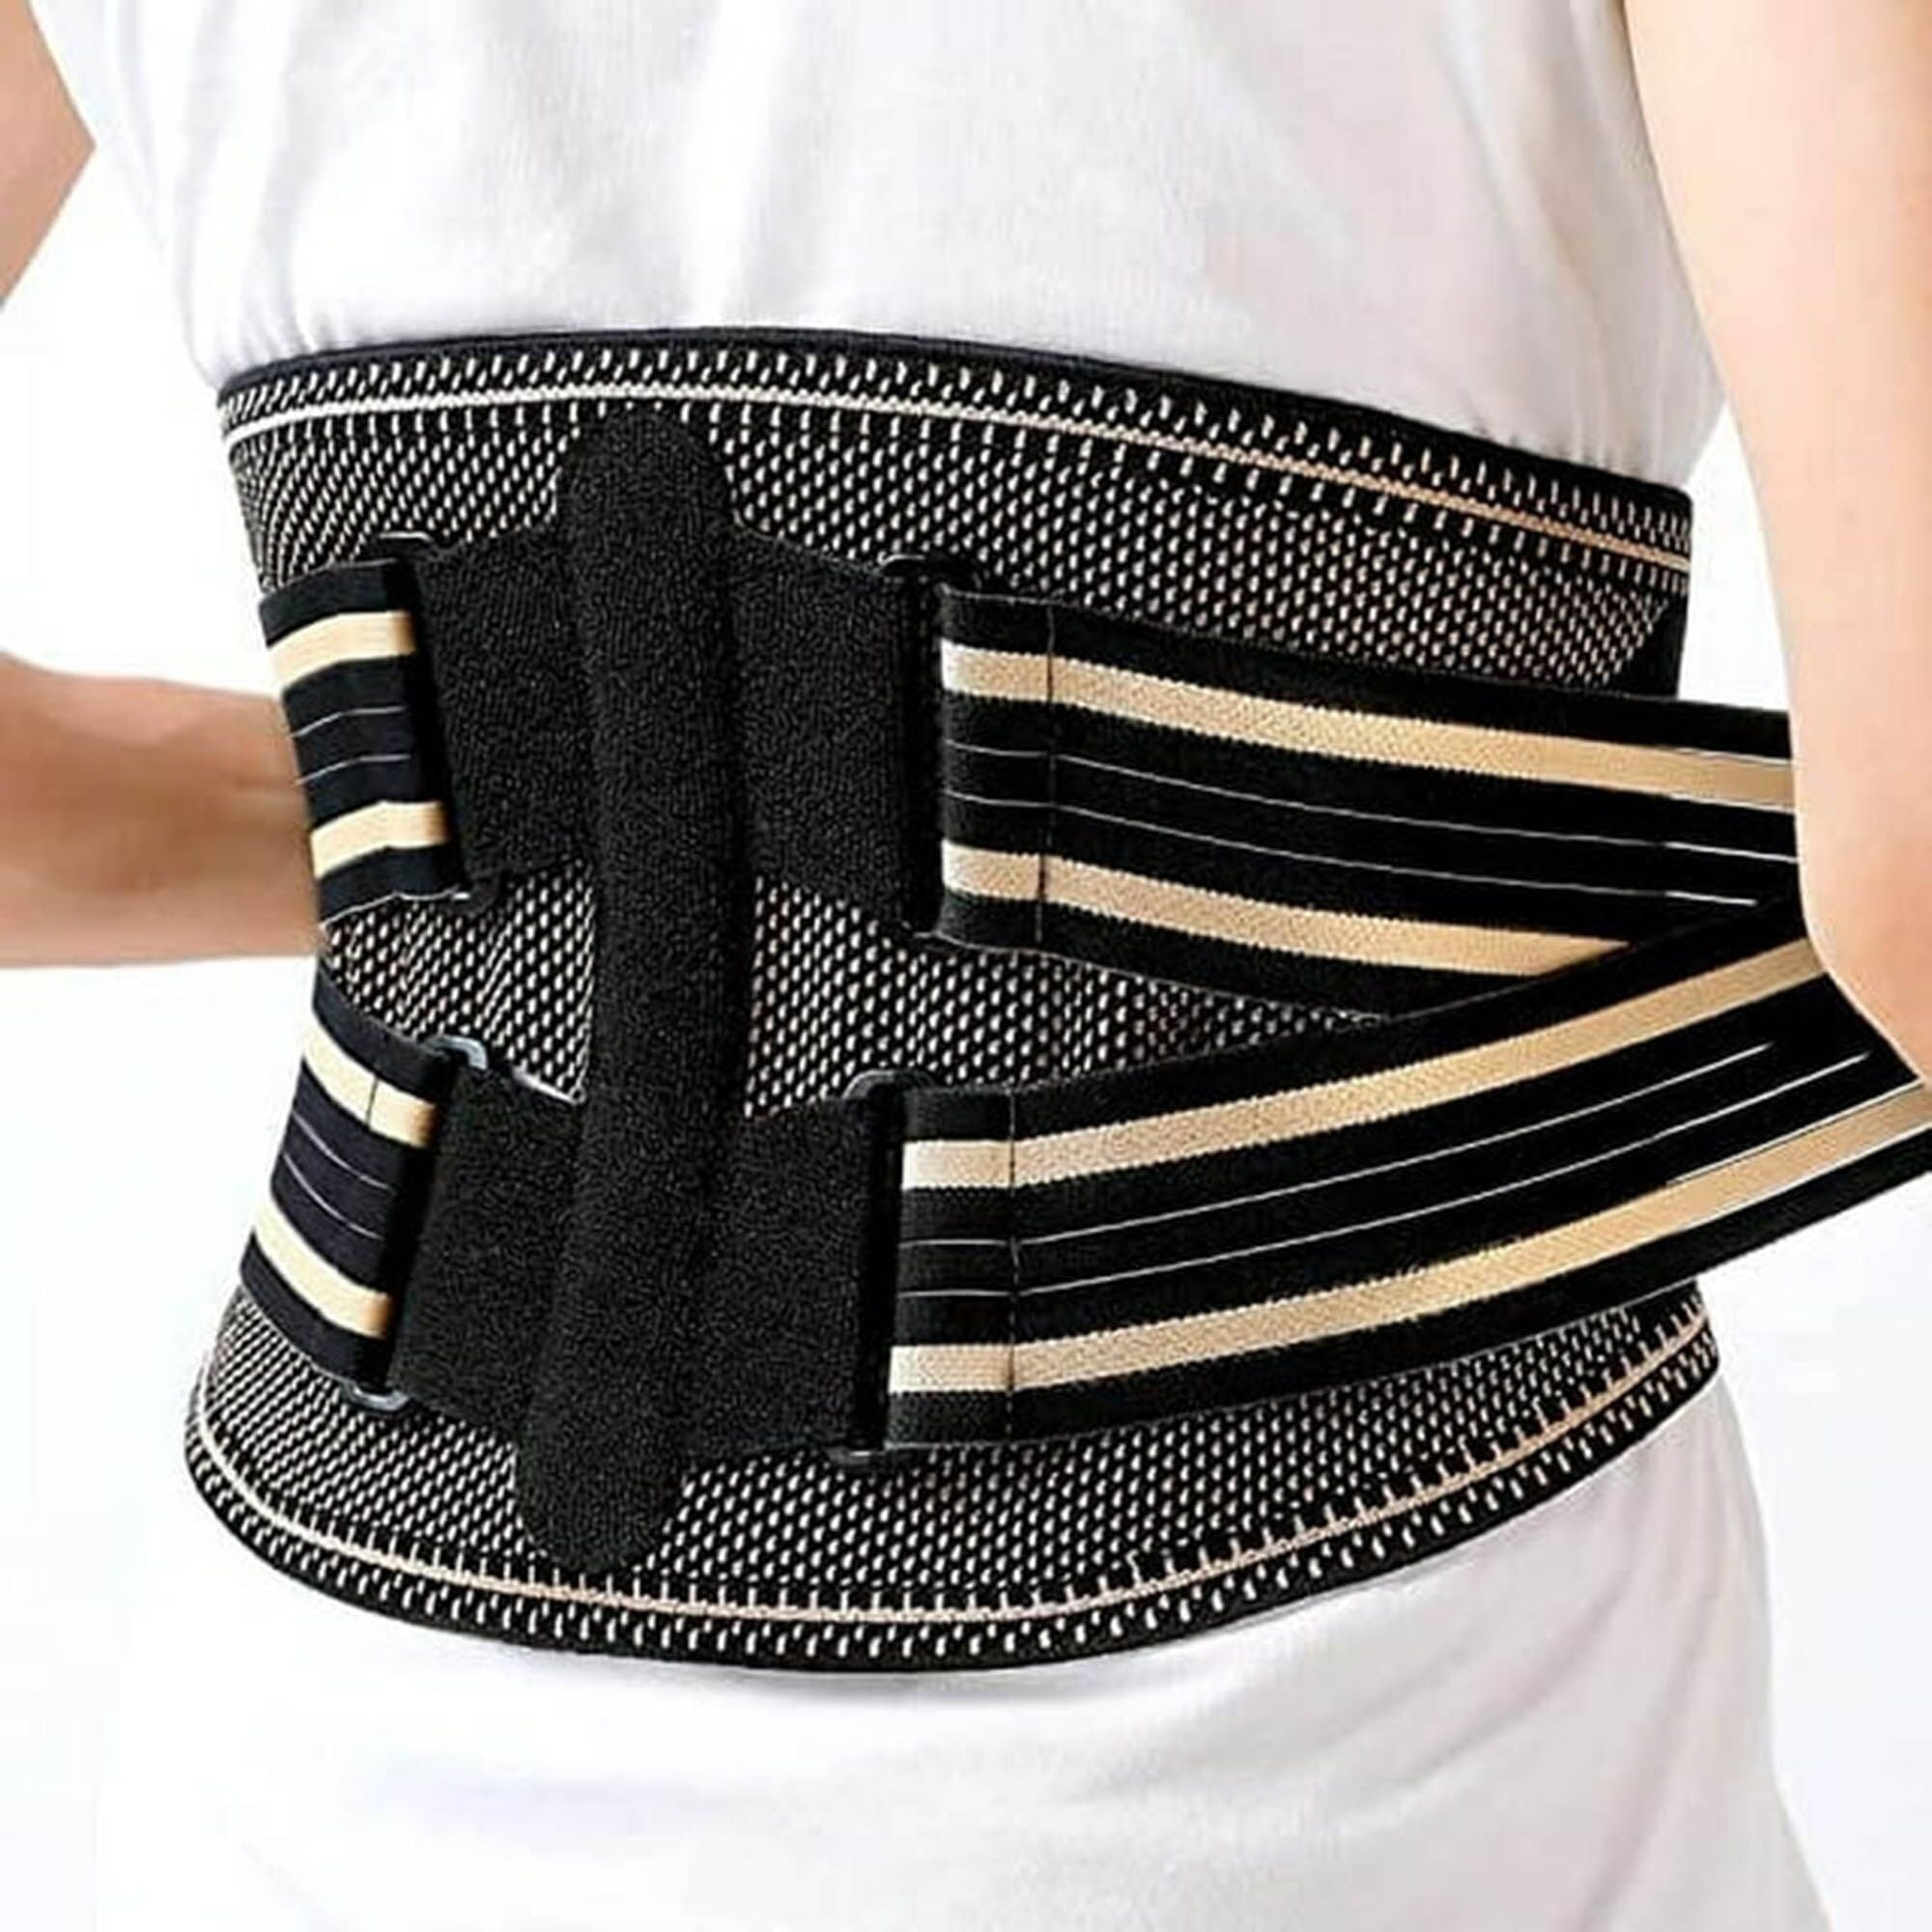 Aptoco Back Brace Compression Lumbar Support Belt with Metal Stays for Men  Women Lower Back Pain Relief Adjustable Posture Corrector Strap for Sciatica  Disc (XL), Valentines Day Gifts 